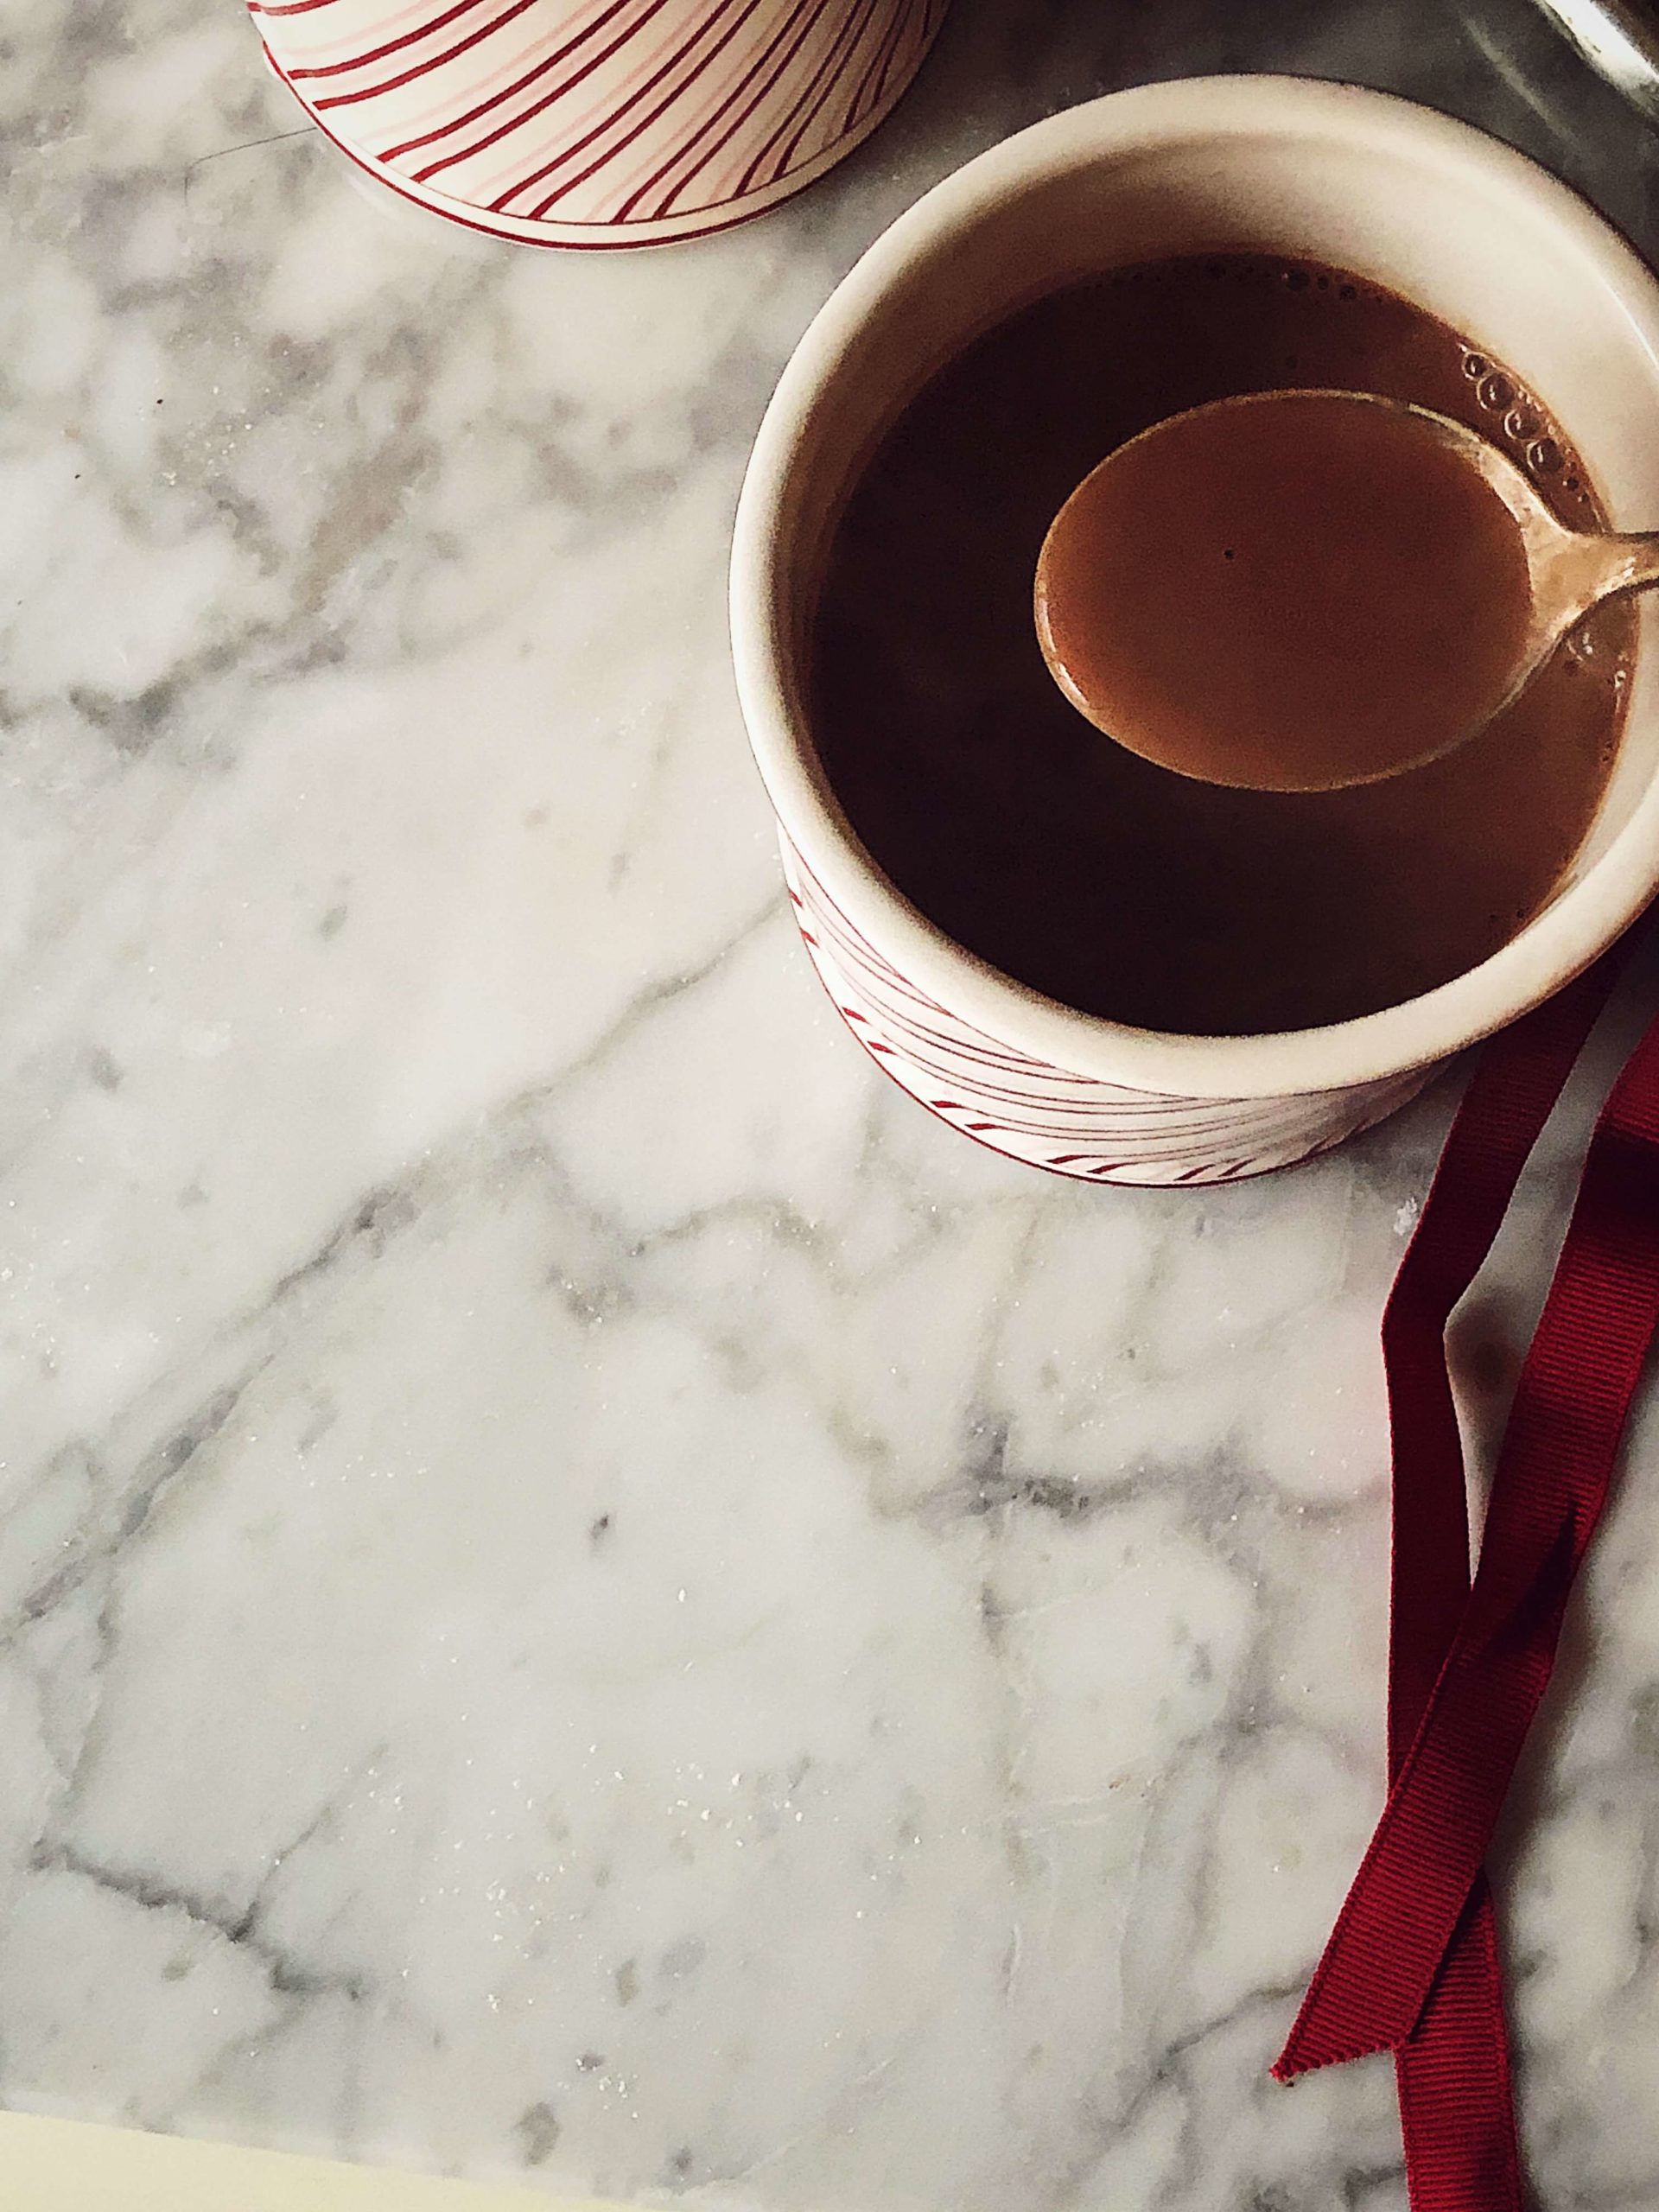 Hot chocolate with nutmeg and honey in a red and white cup